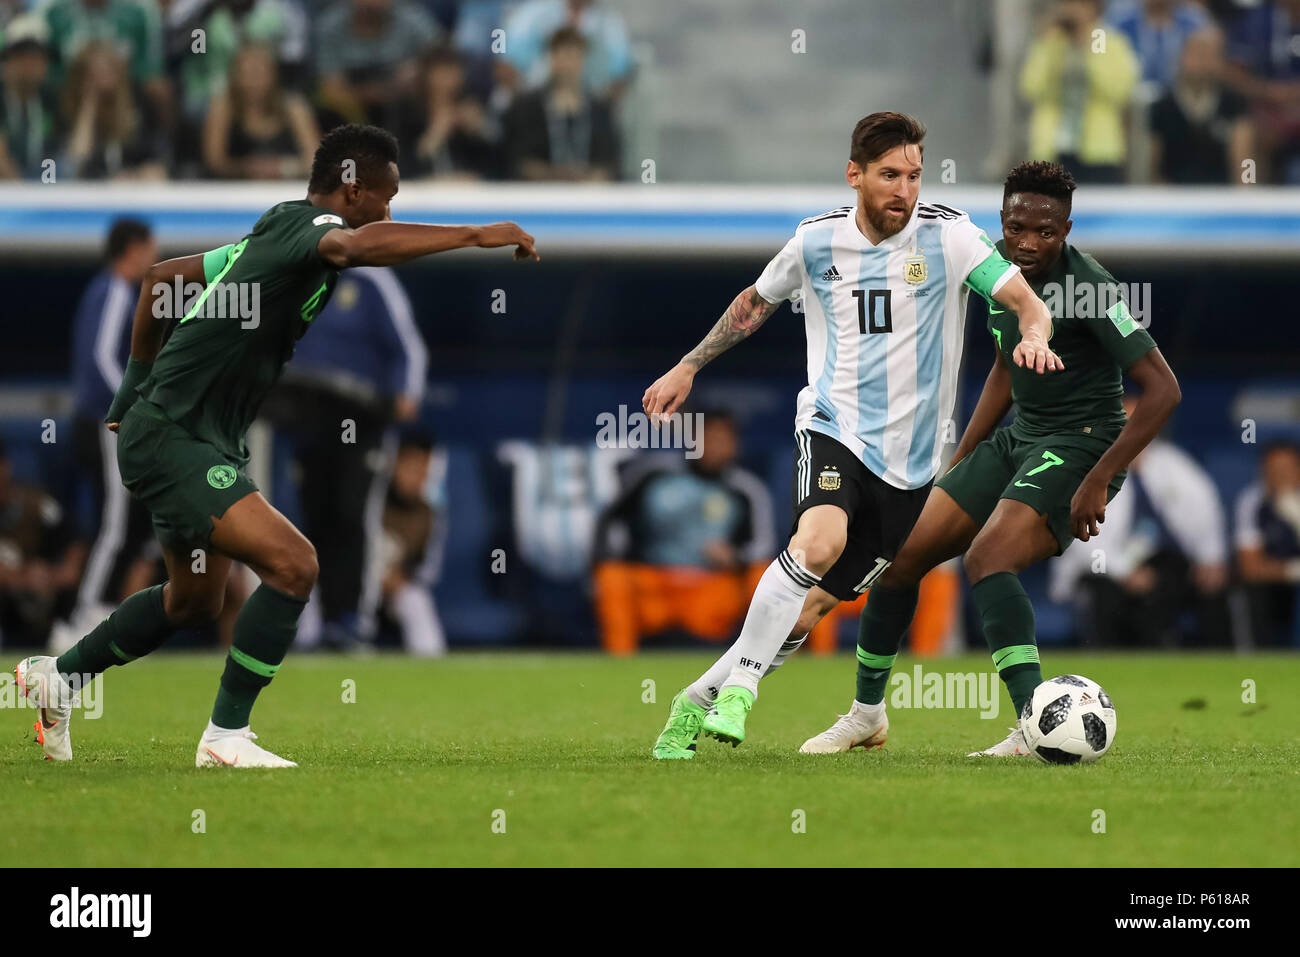 St Petersburg, Russia. 26th Jun, 2018. Lionel Messi of Argentina and Ahmed Musa of Nigeria during the 2018 FIFA World Cup Group D match between Nigeria and Argentina at Saint Petersburg Stadium on June 26th 2018 in Saint Petersburg, Russia. (Photo by Daniel Chesterton/phcimages.com) Credit: PHC Images/Alamy Live News Stock Photo